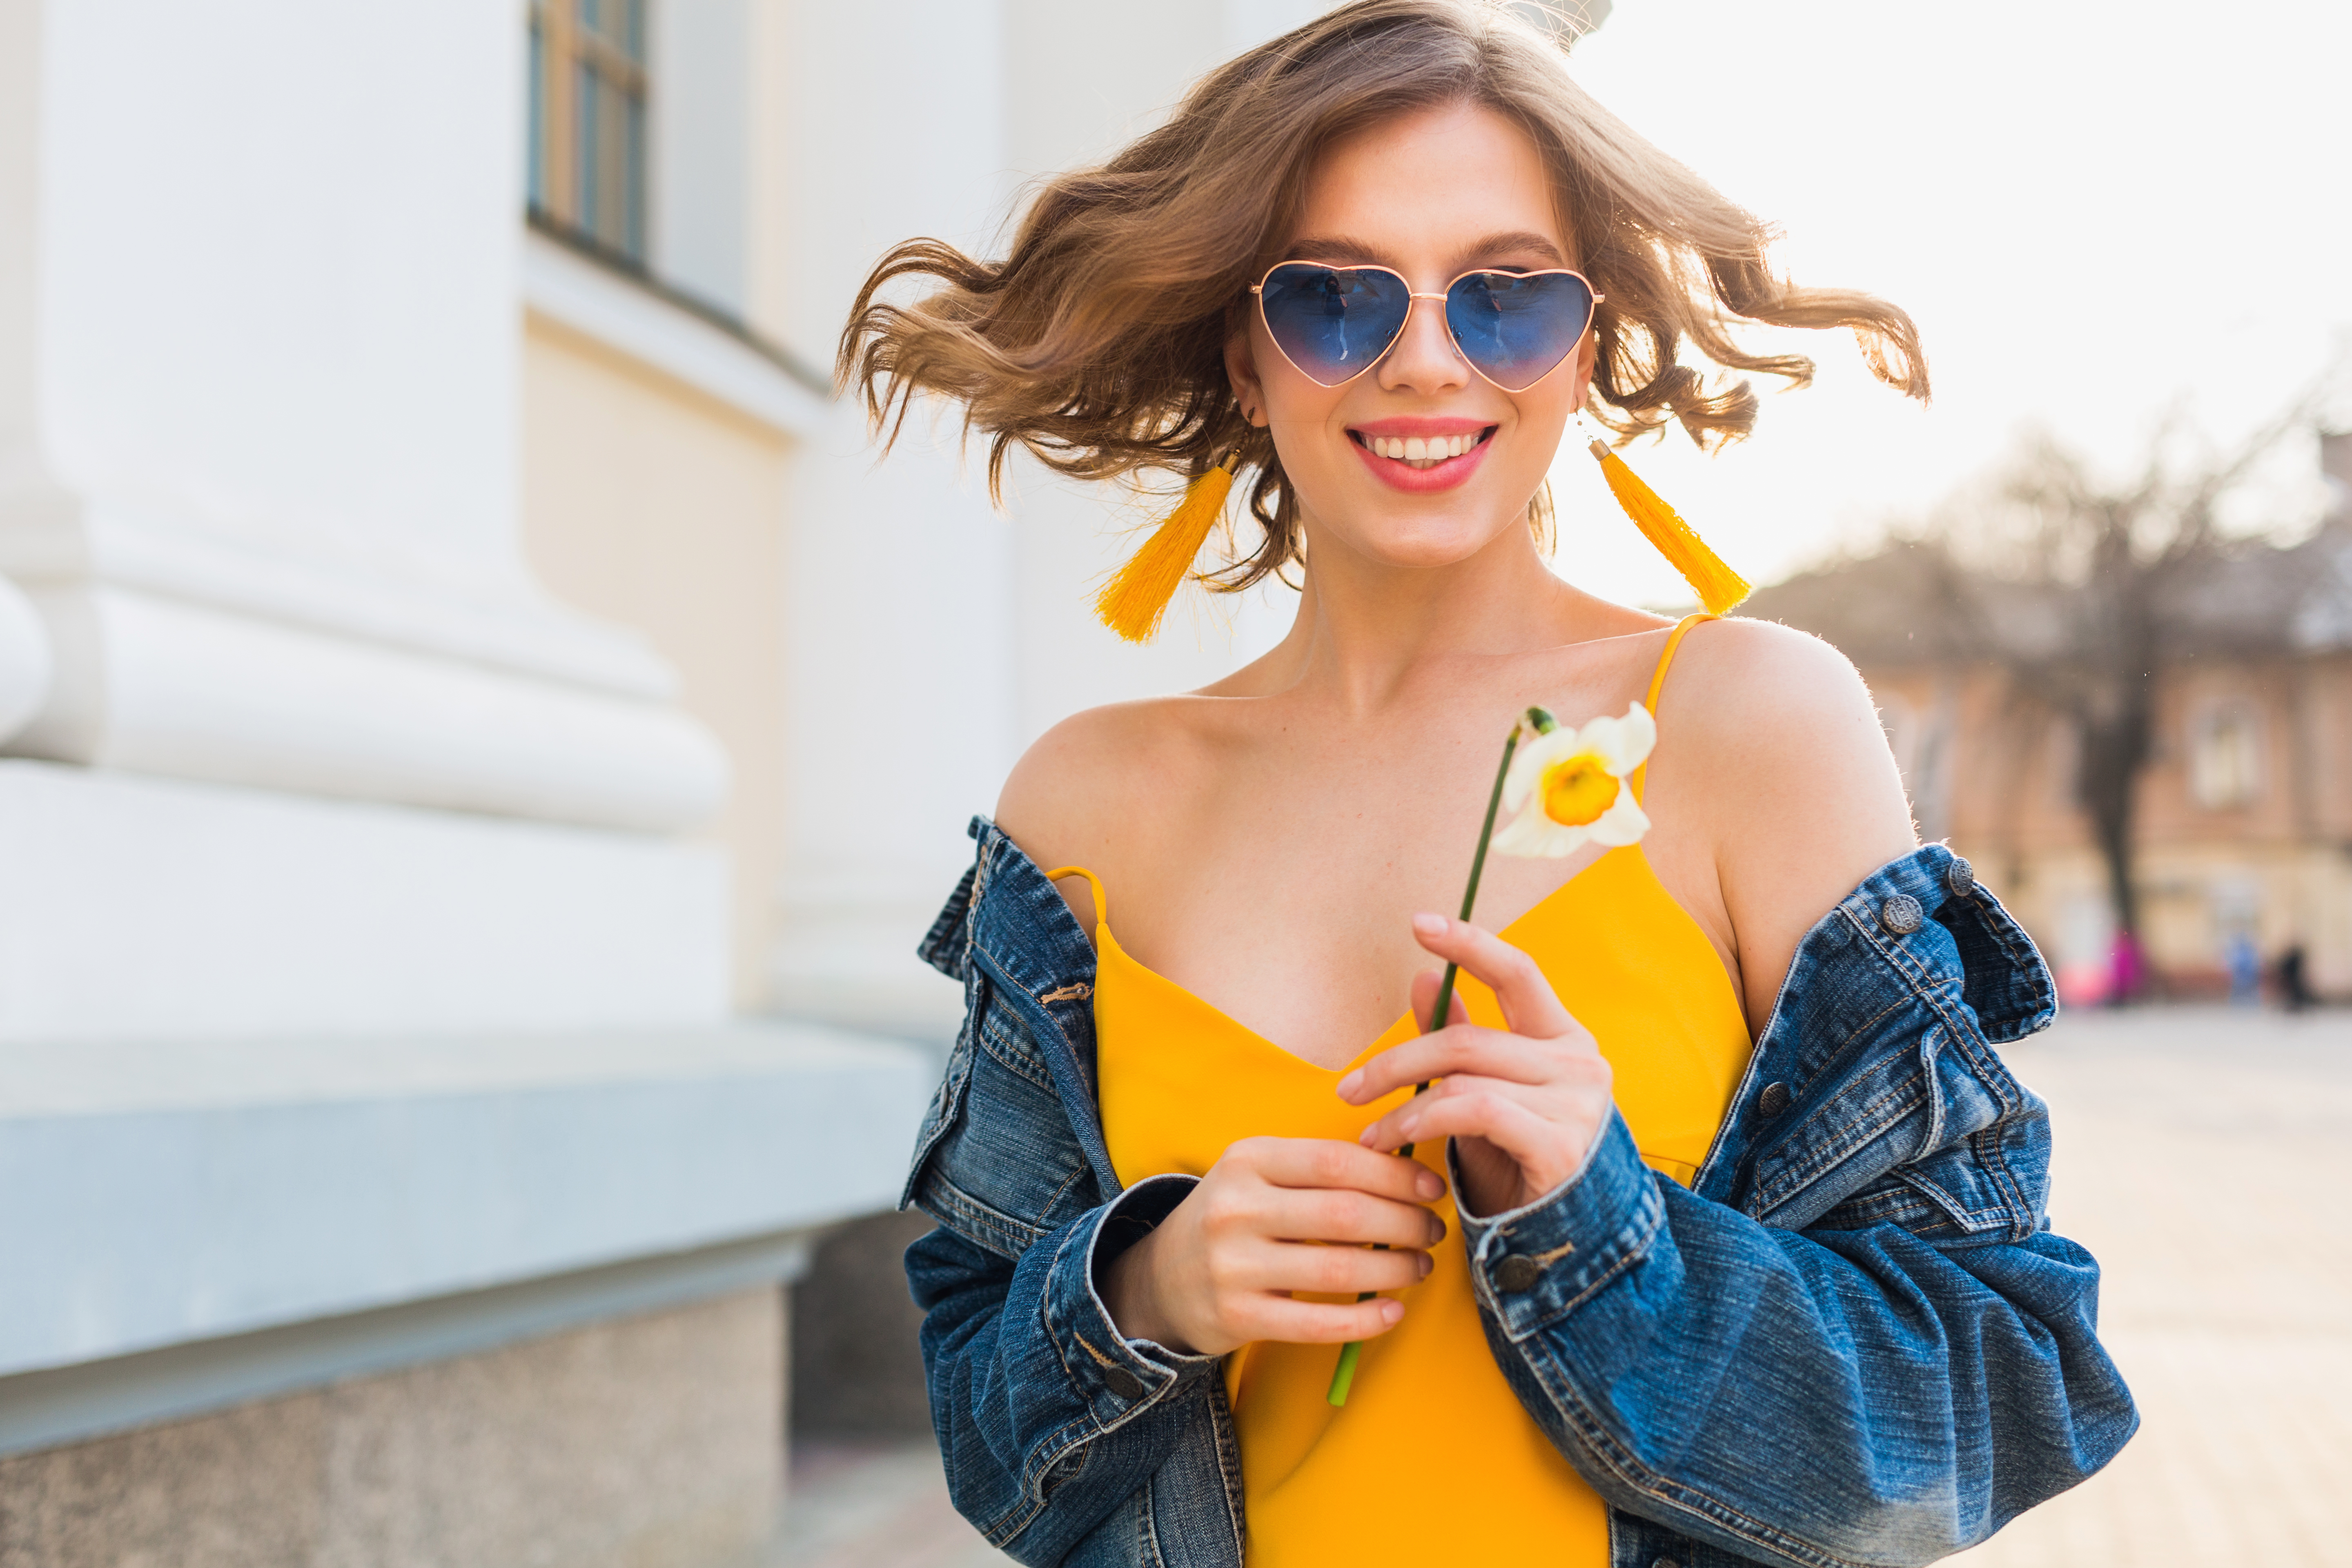 A Woman with a Yellow Dress and Denim Jacket